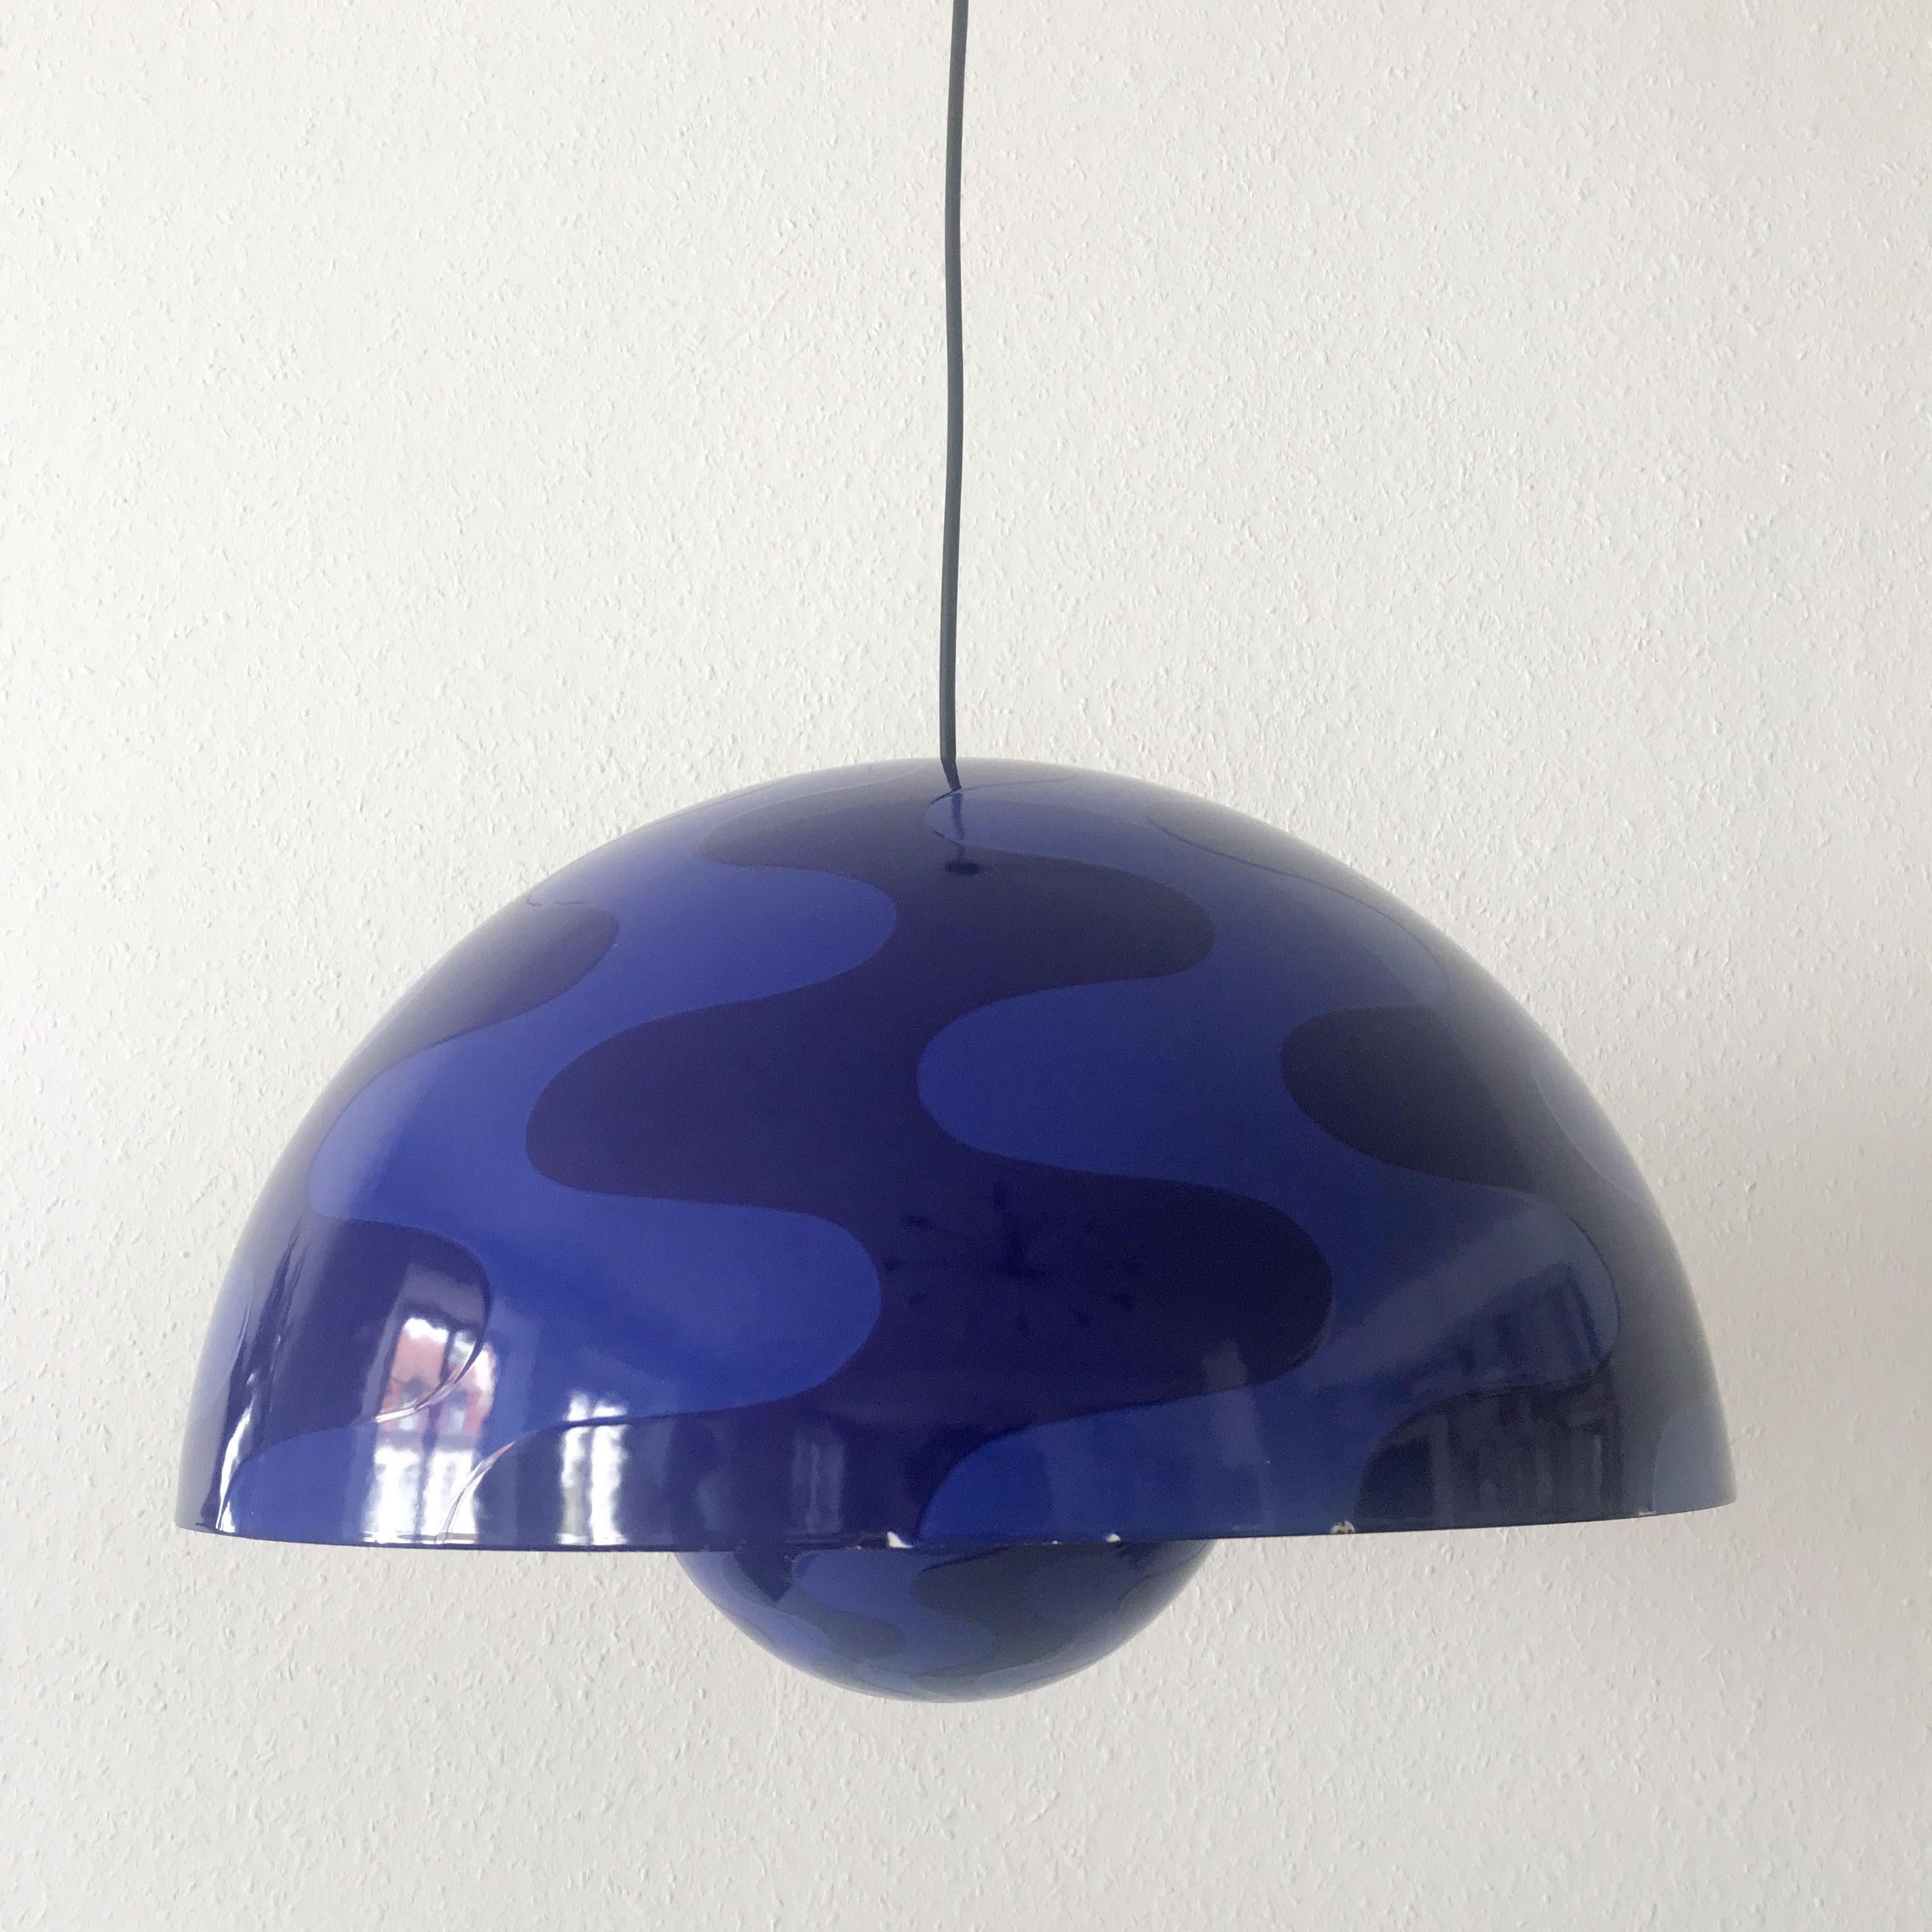 Metal Rare and Large Flower Pot Pendant Lamp by Verner Panton for Louis Poulsen 1971 For Sale